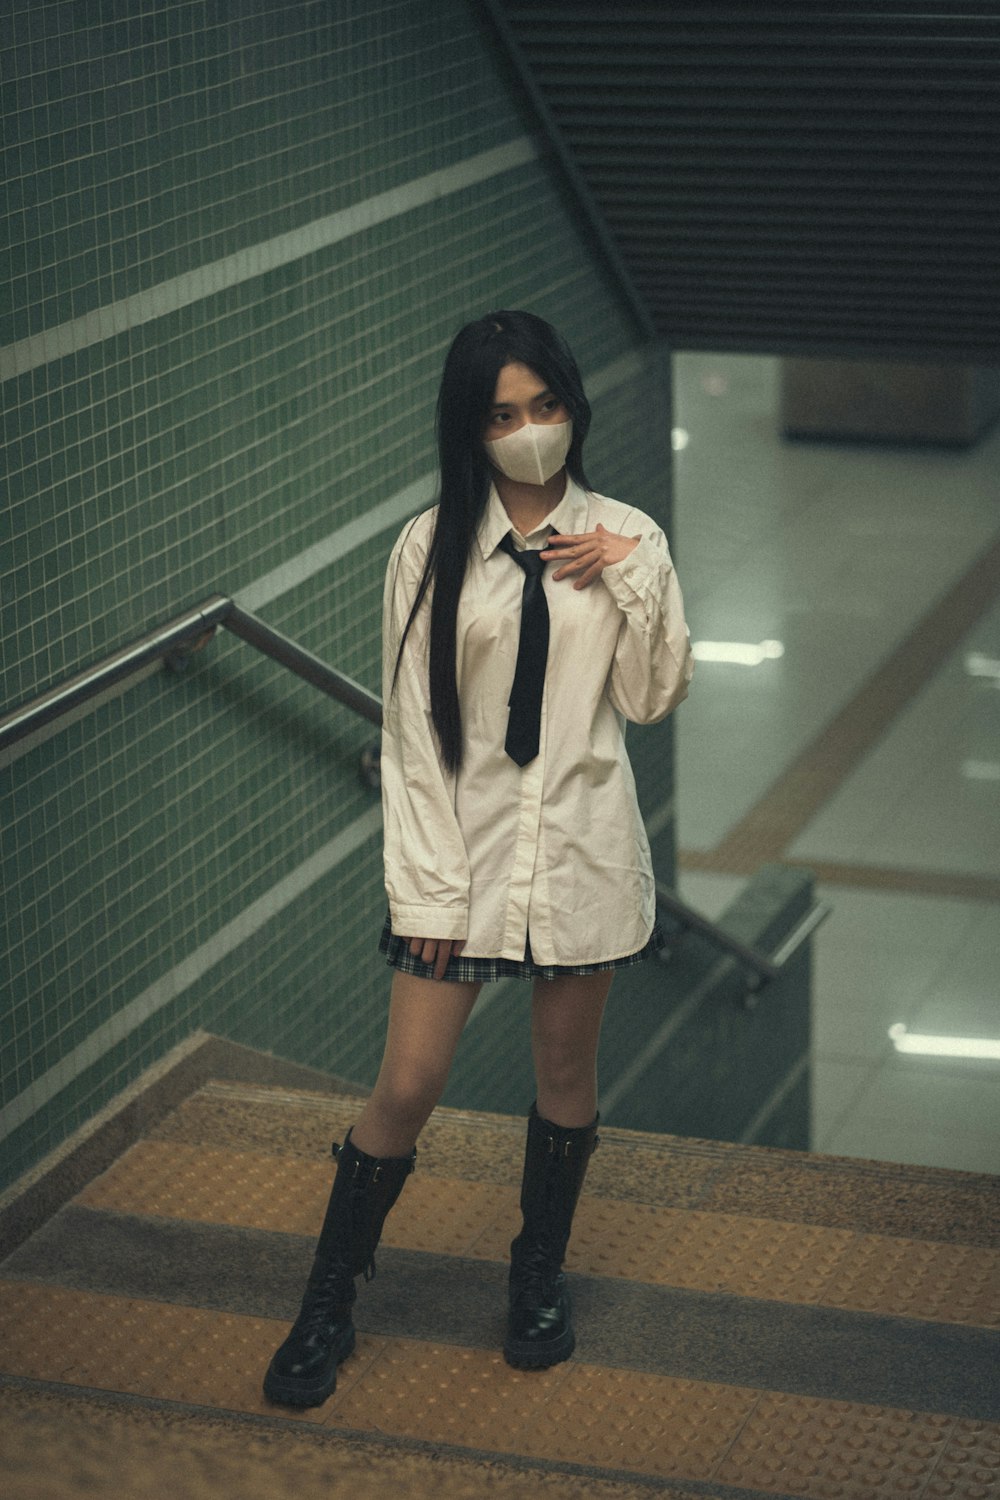 a woman wearing a mask and a tie standing on a set of stairs